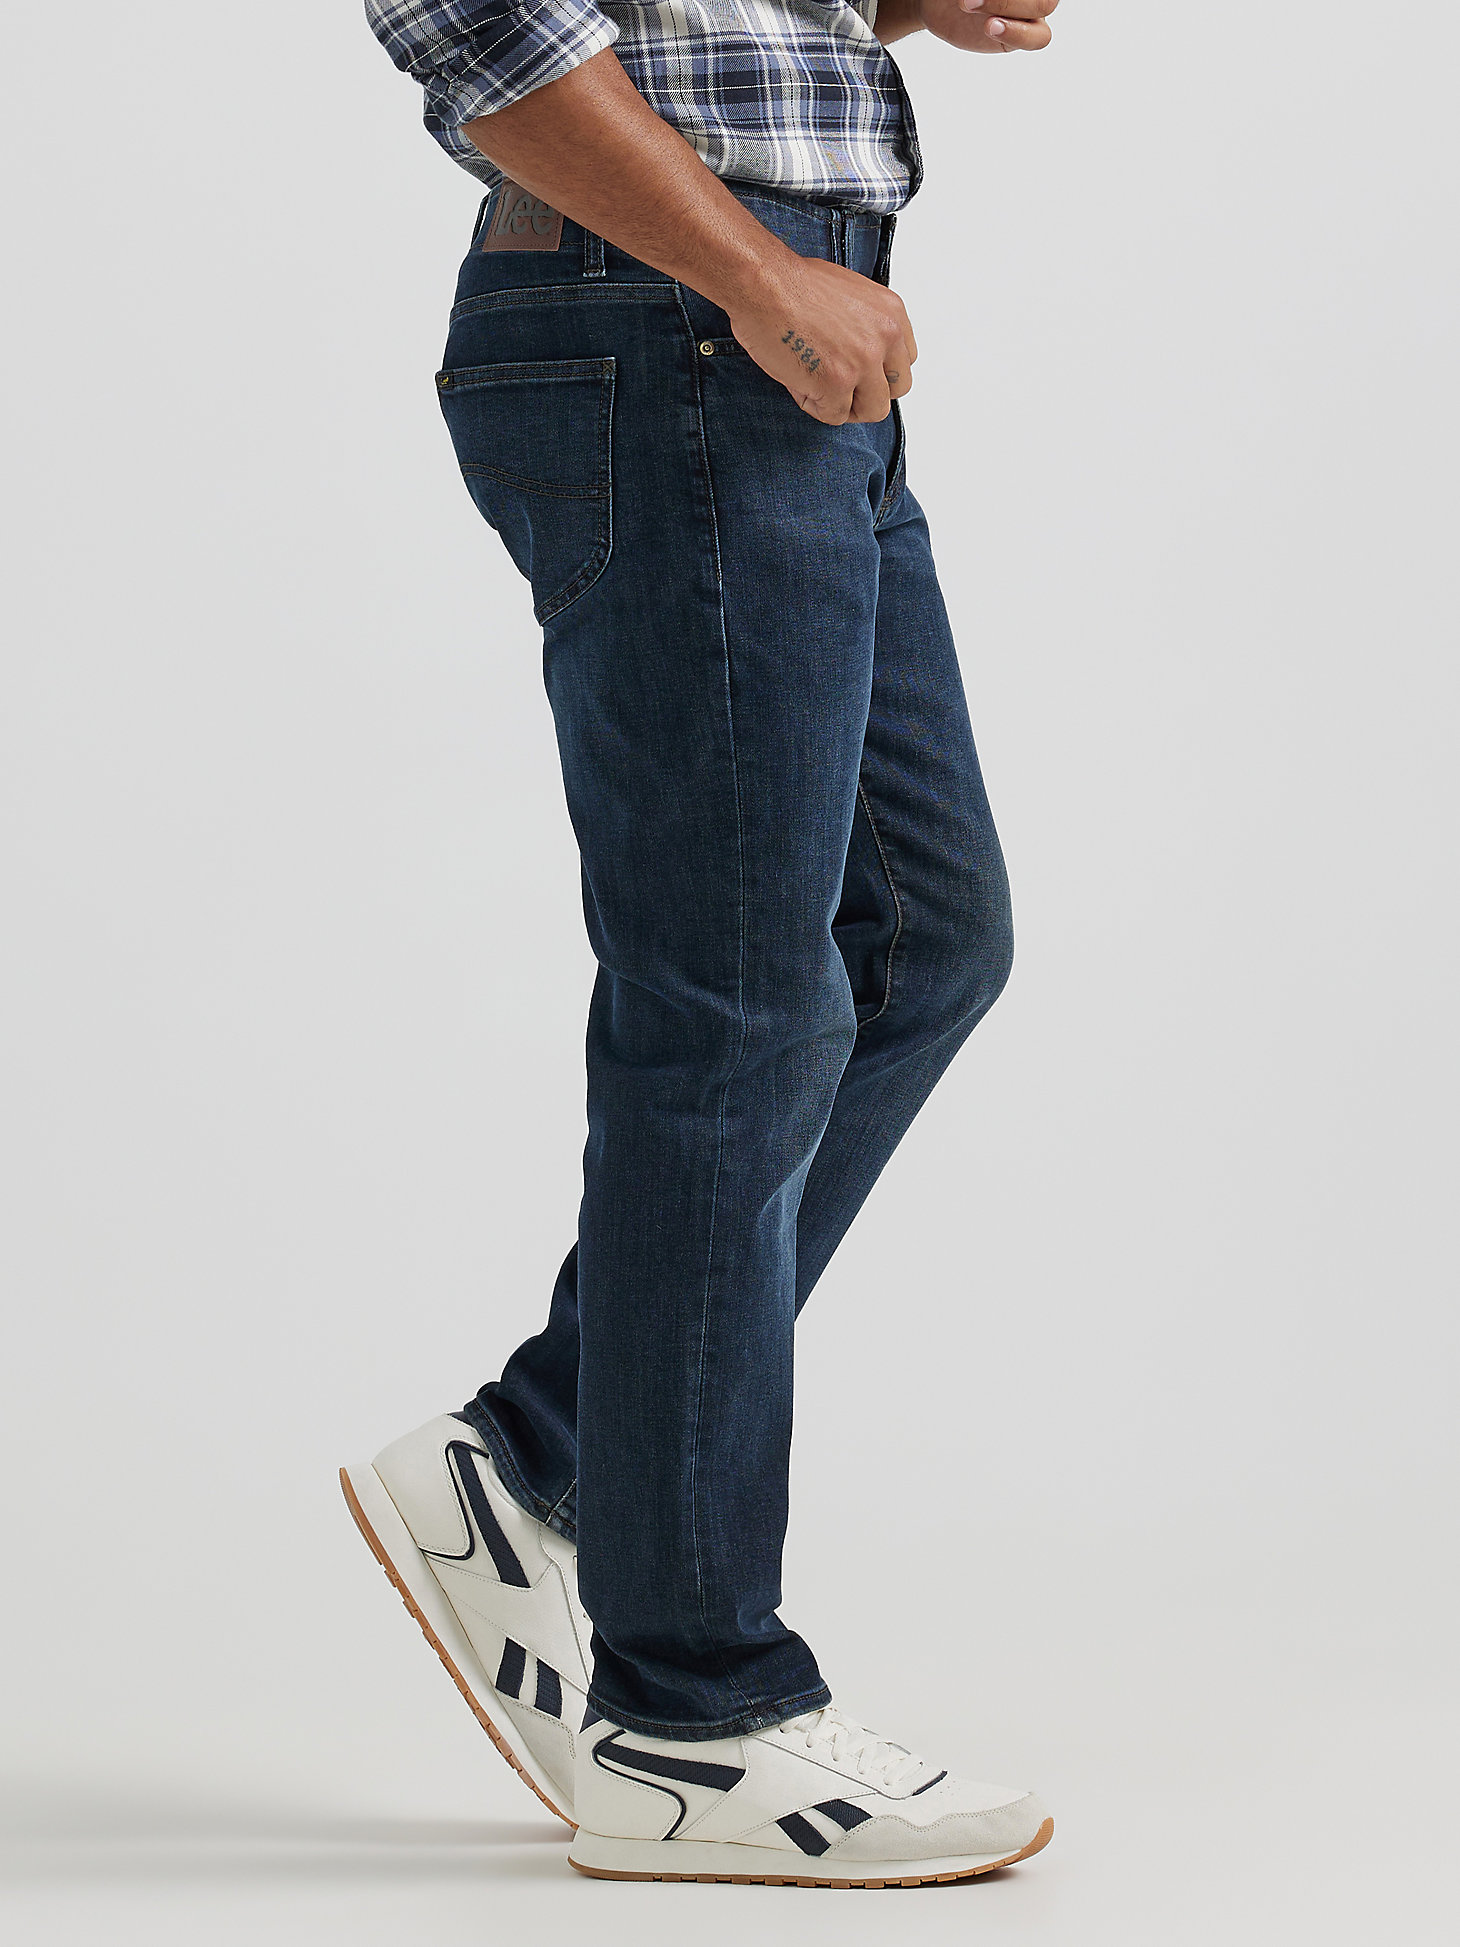 Men's Extreme Motion MVP Athletic Tapered Jean in Executive alternative view 3